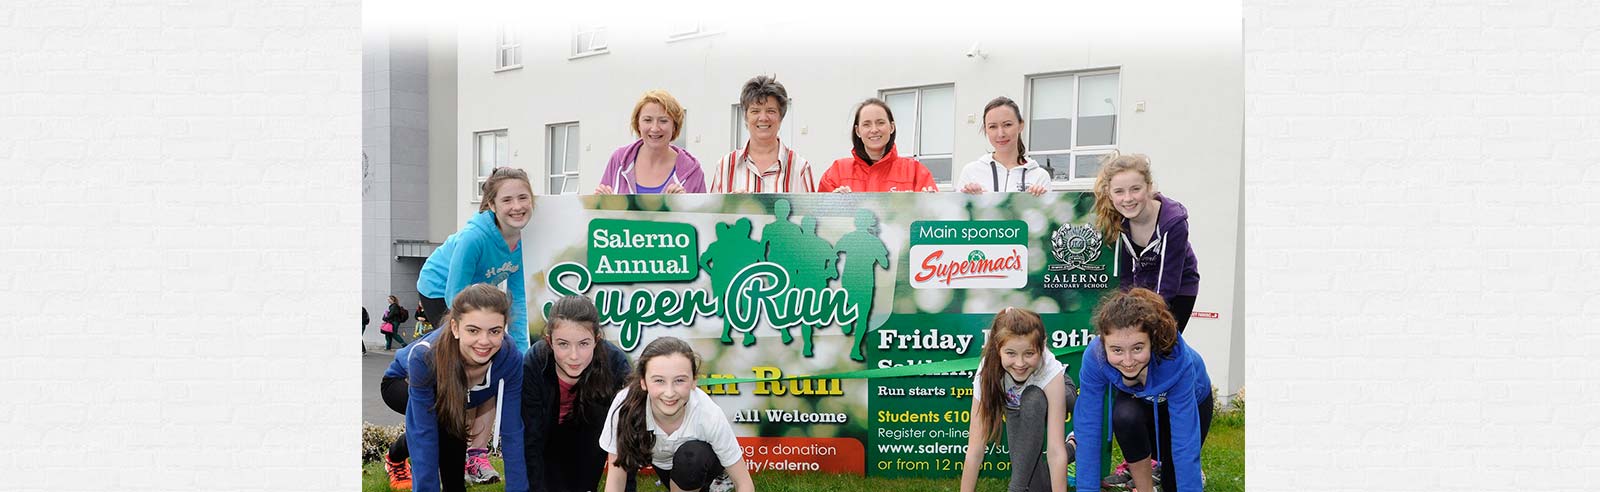 Supermac’s team up with Salerno for Annual SuperRun